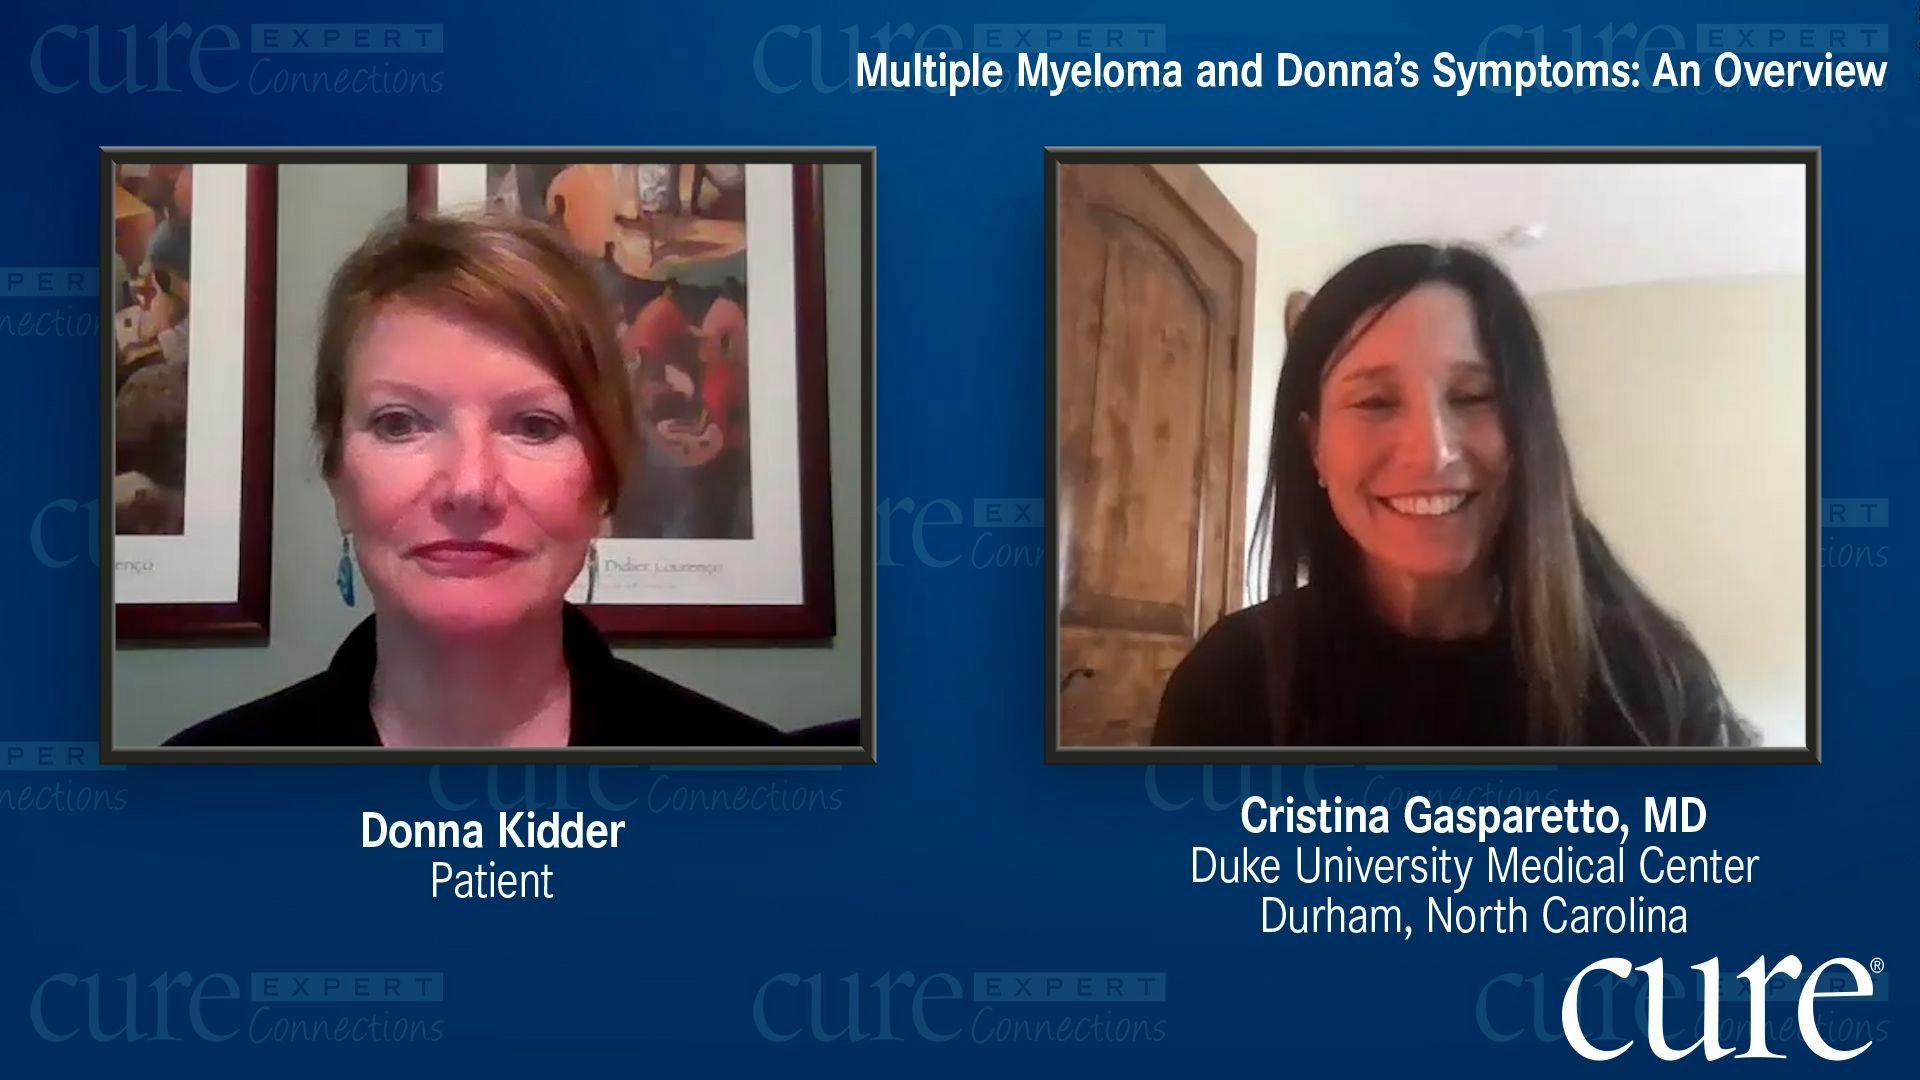 Multiple Myeloma and Donna’s Symptoms: An Overview